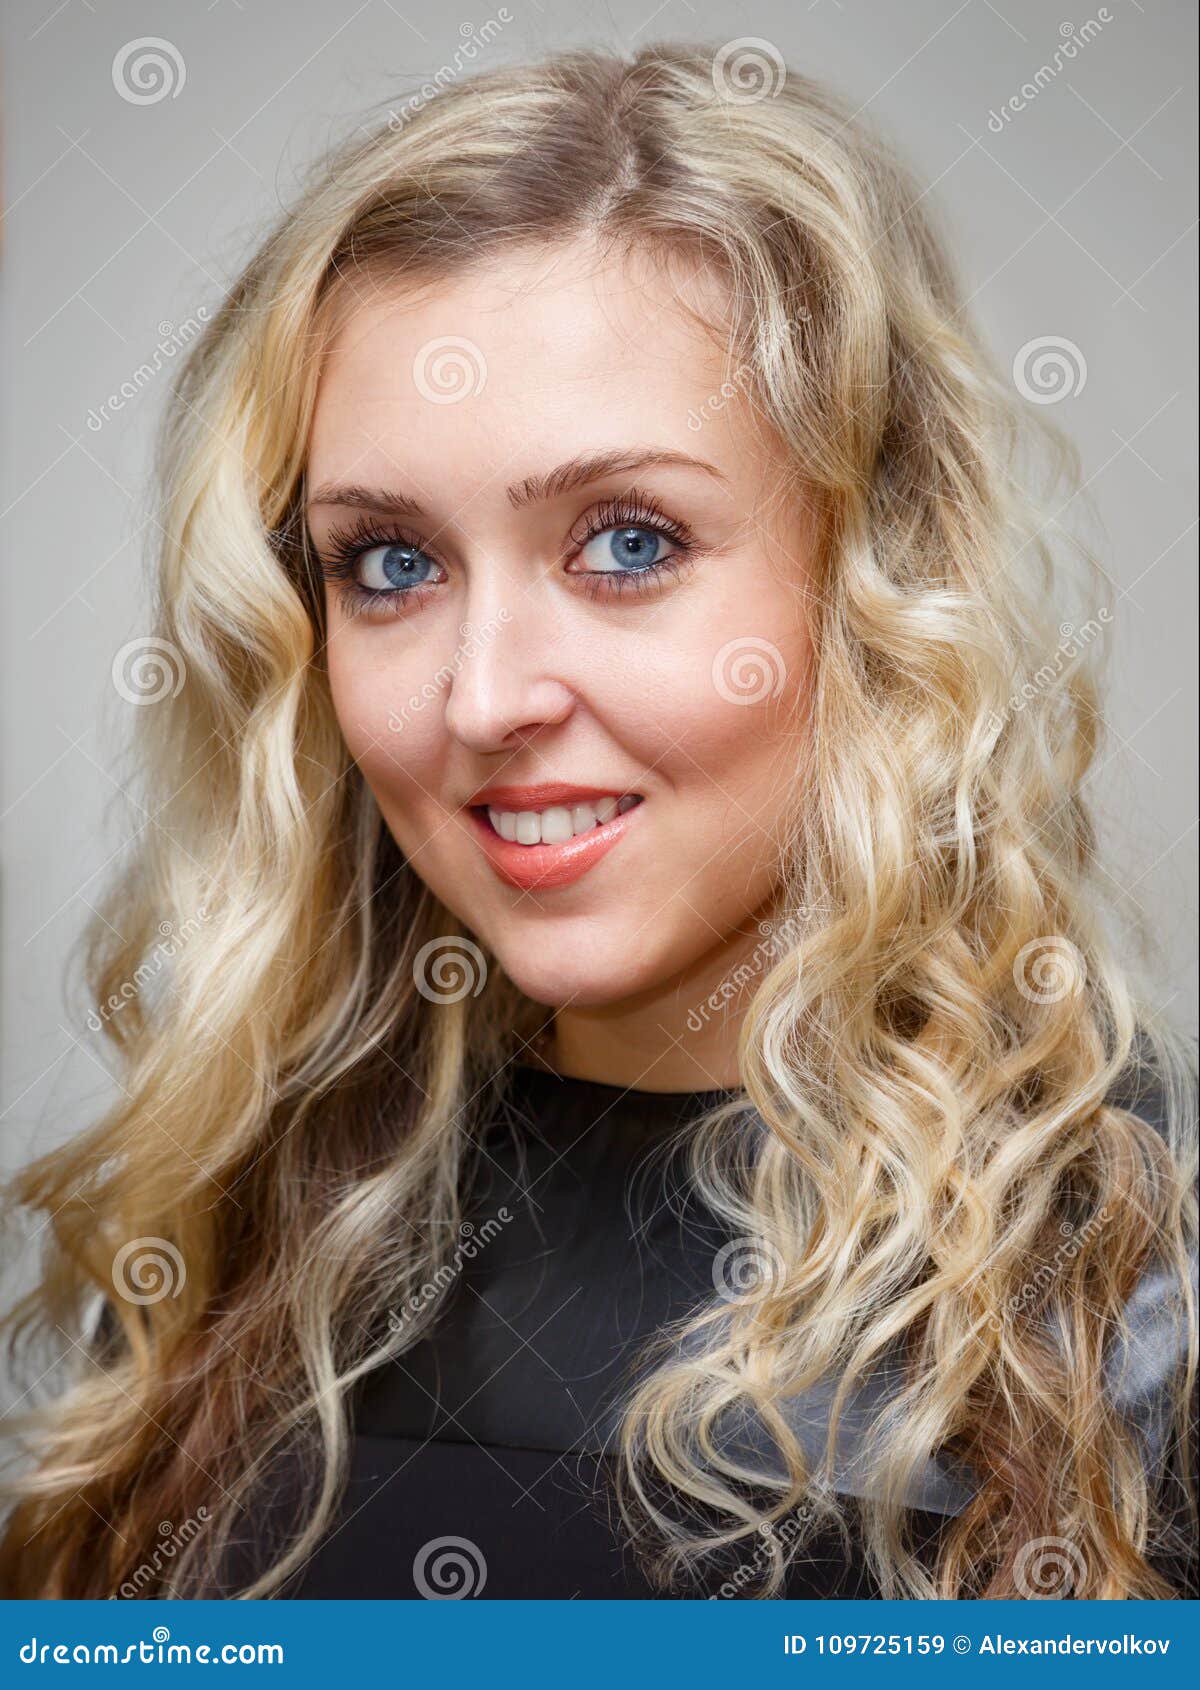 Portrait Of A Smiling Young Charming Woman With Long Wavy Blonde